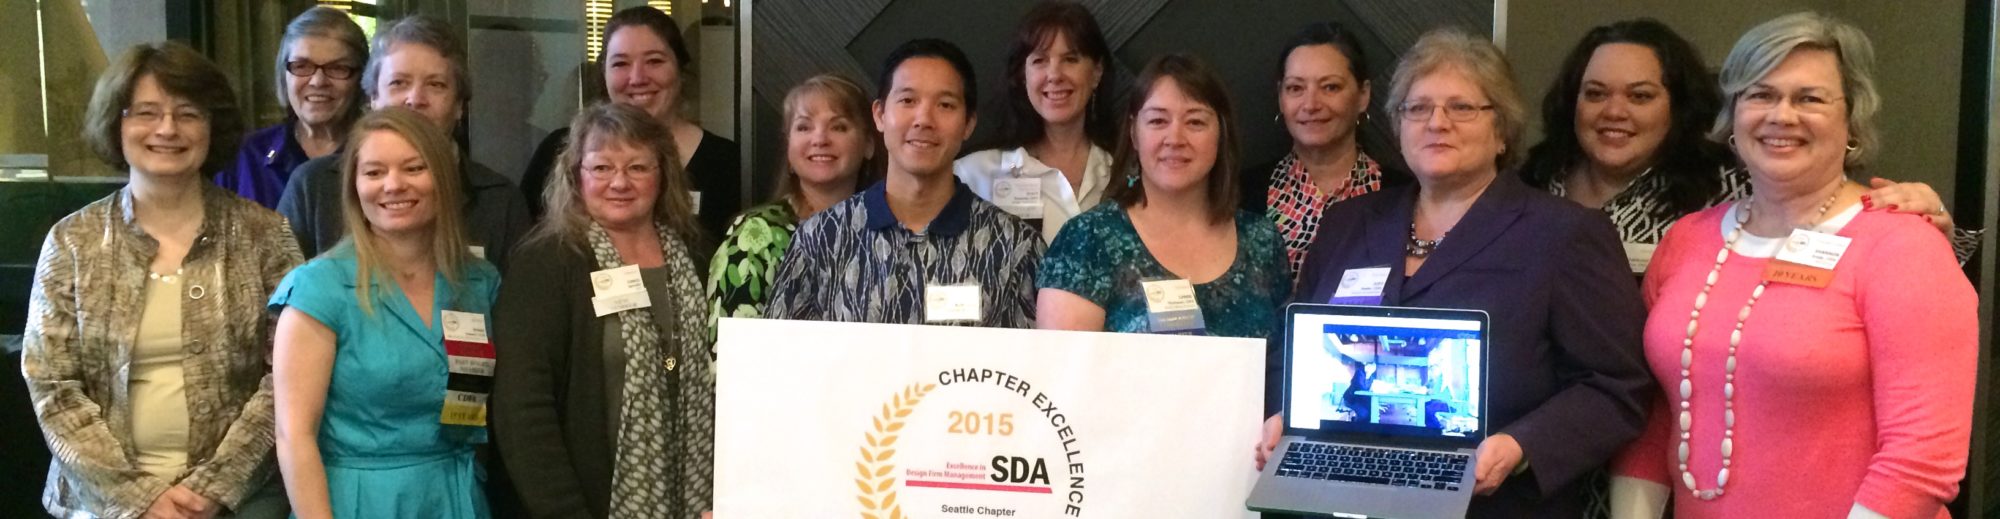 SDA Seattle Chapter